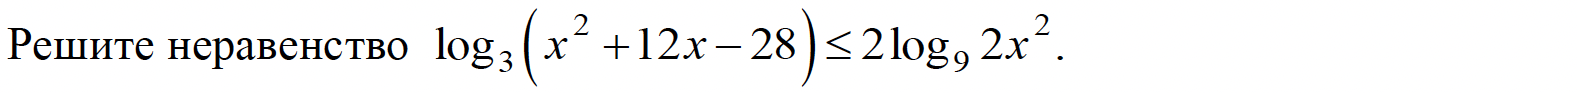 Как partial sum. Cos(0,9555) = 0,5772005288. Using Series Fourier find the value of the Series:.